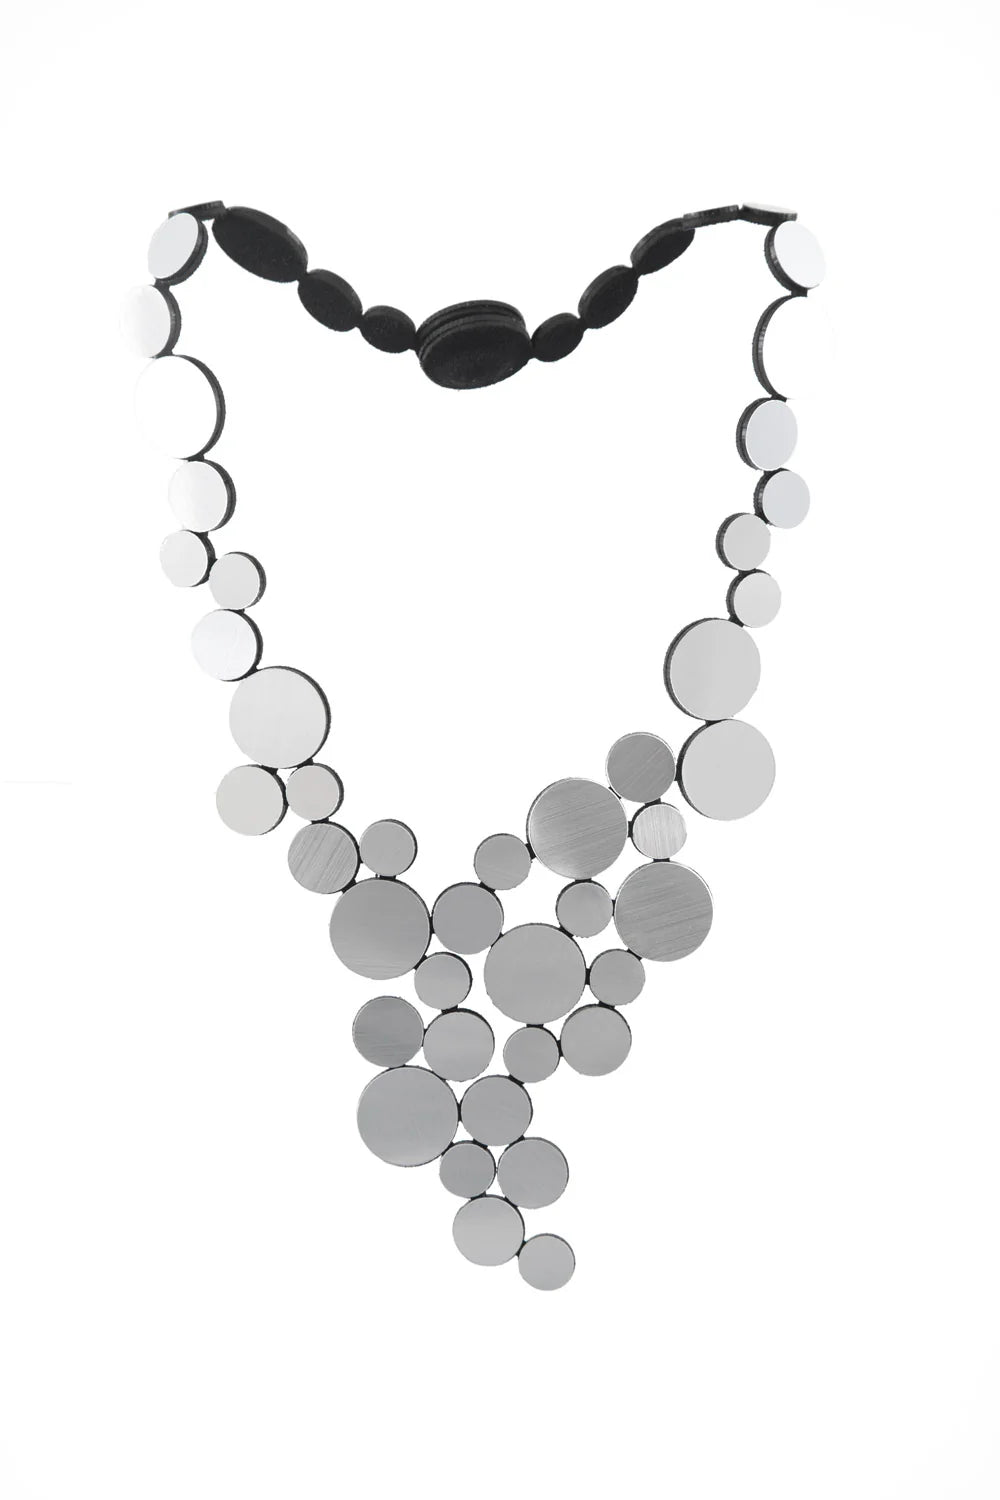 Iskin Sisters Abstraction Necklace in Silver